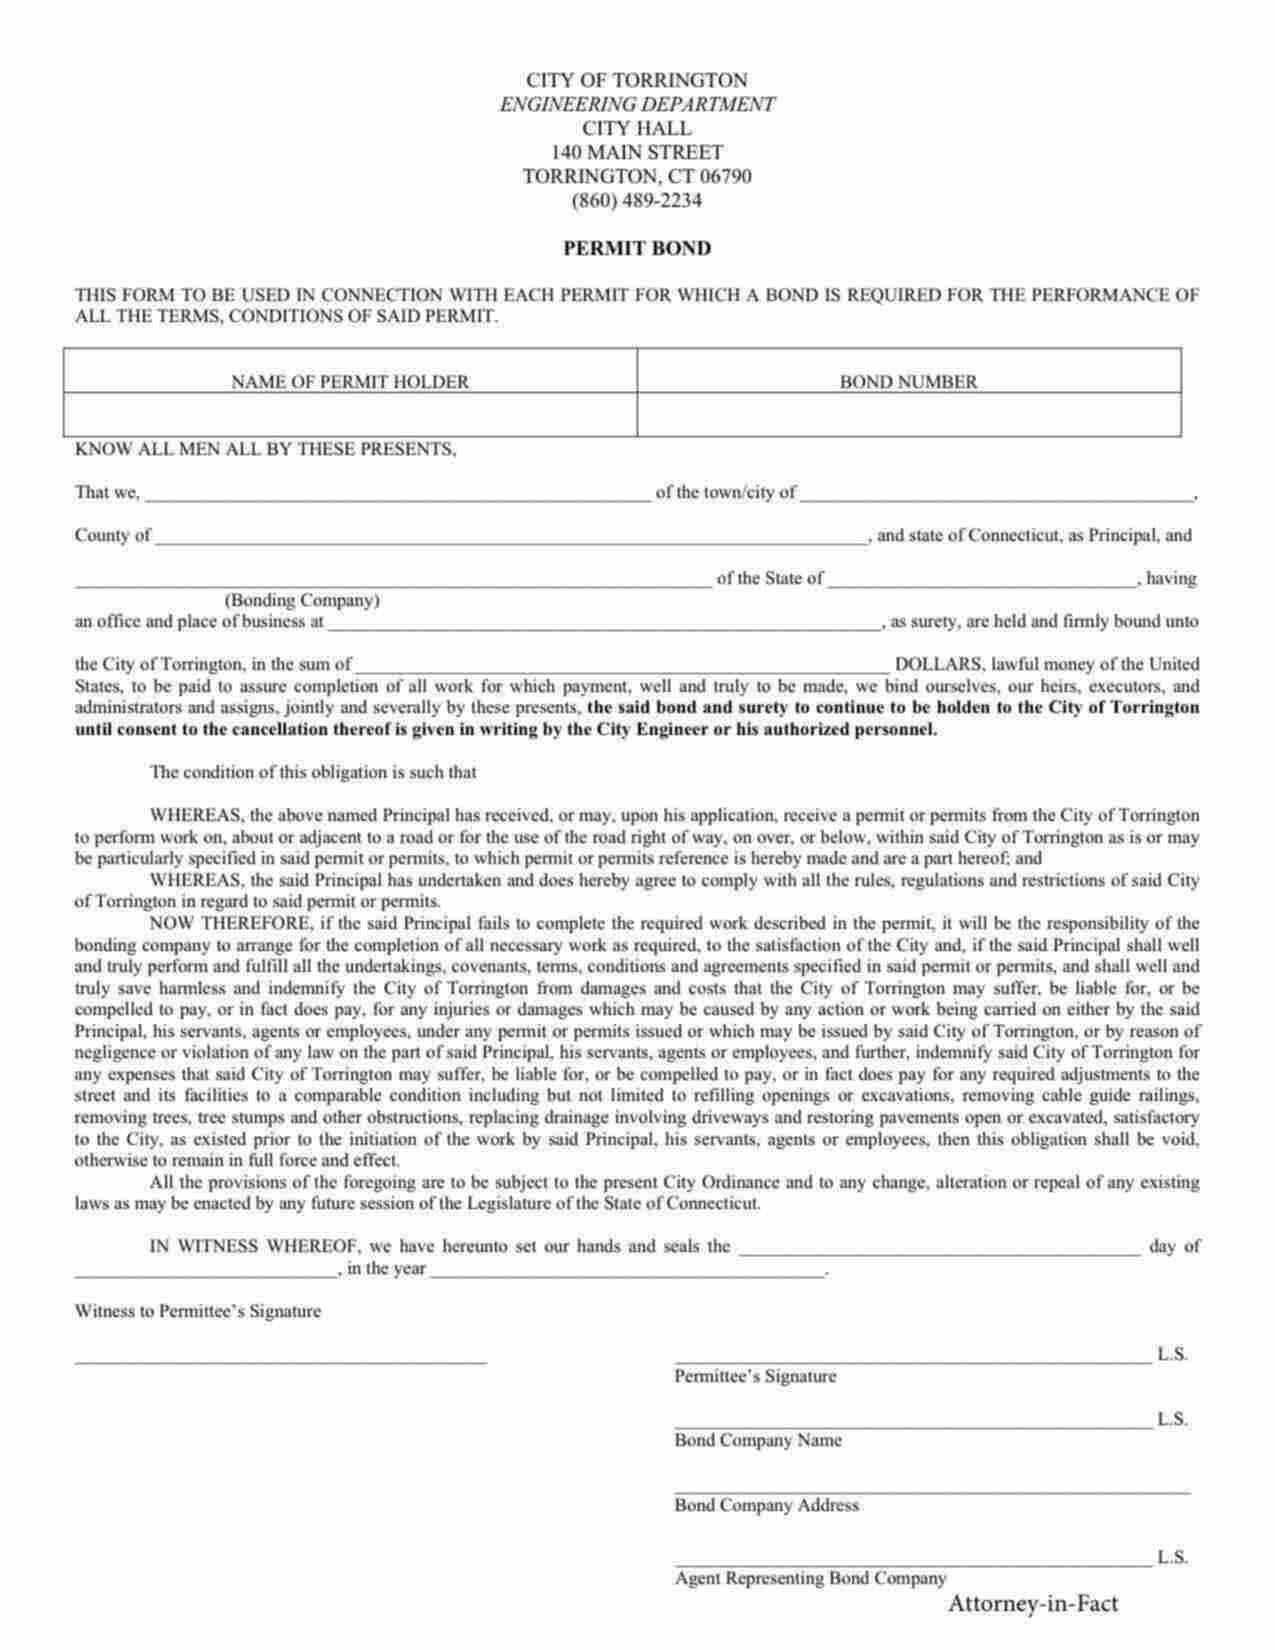 Connecticut Right of Way Permit Bond Form